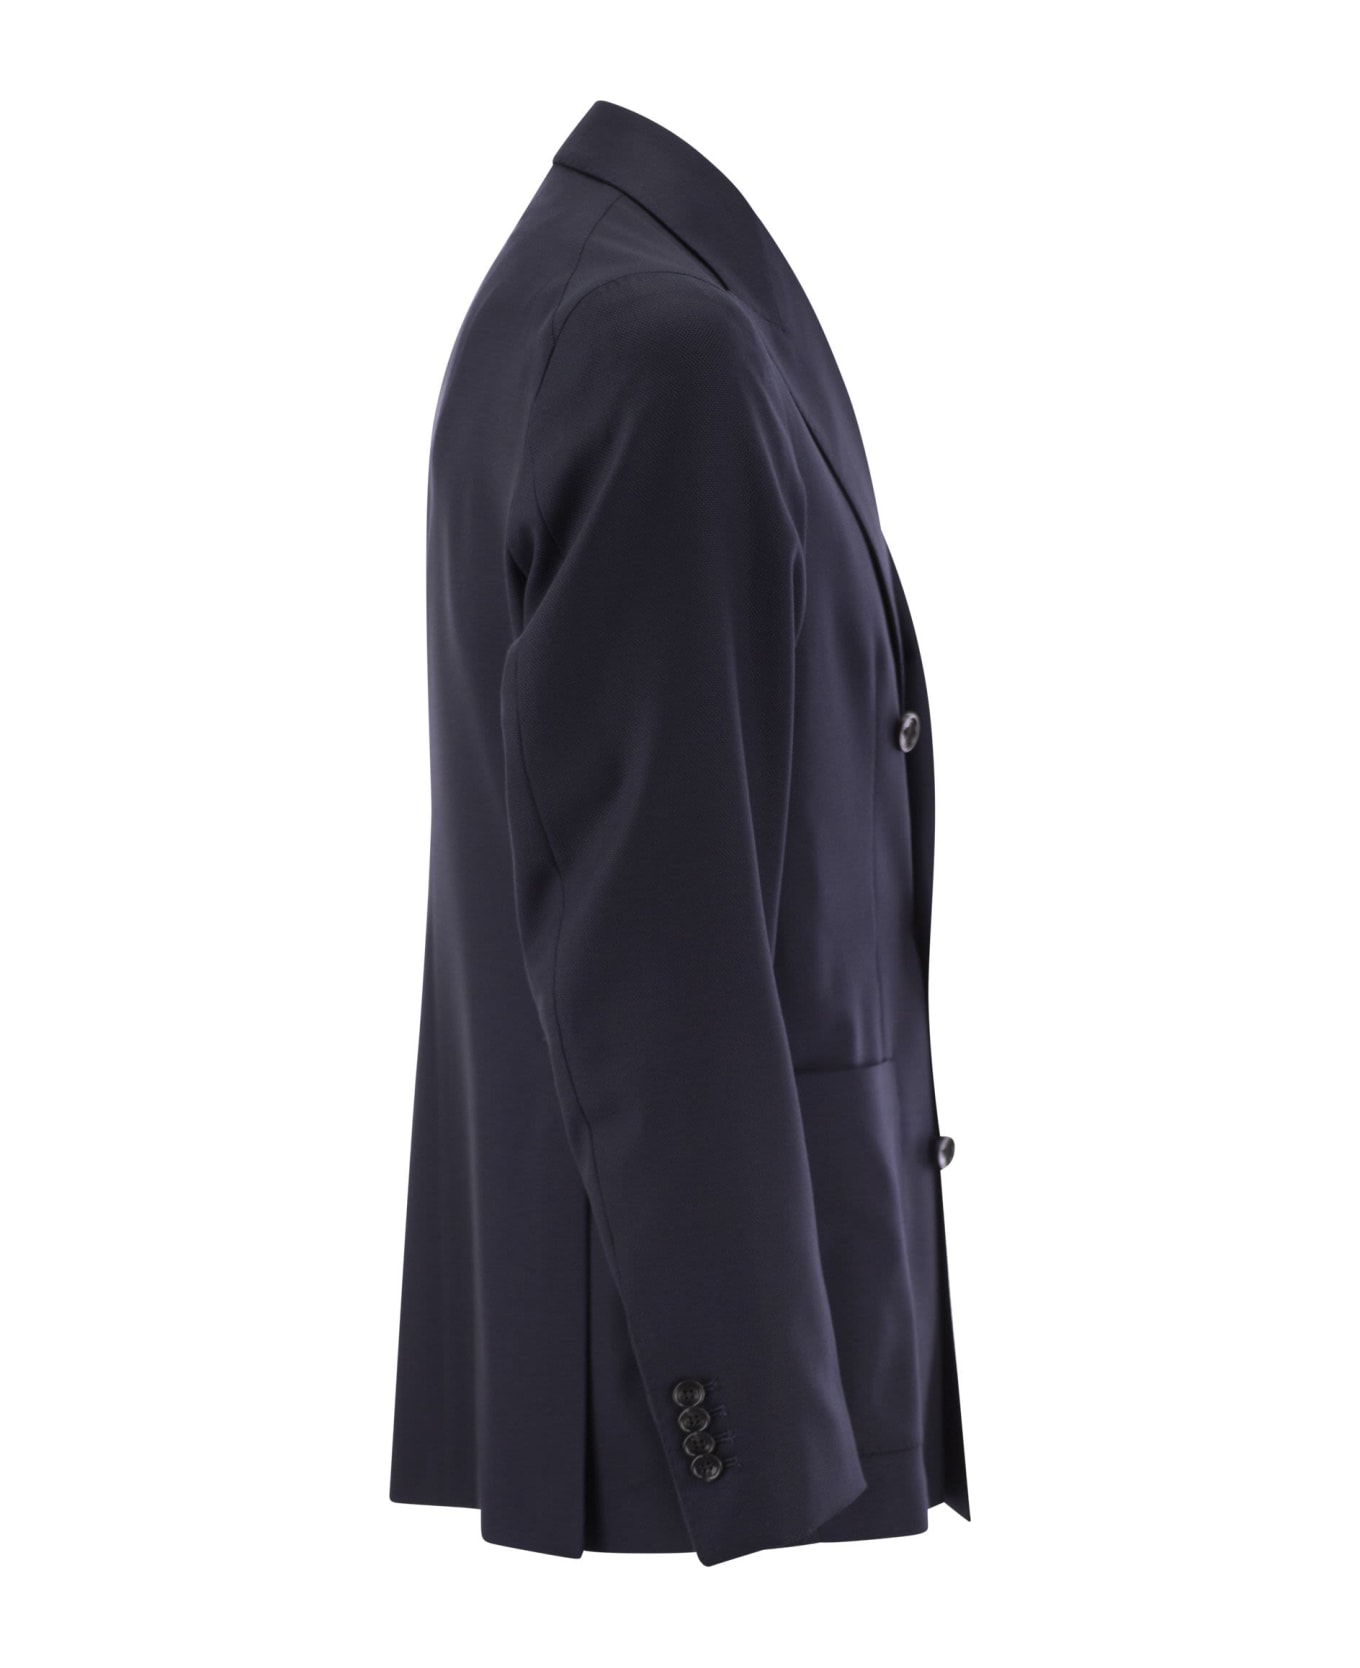 Tagliatore Double-breasted Cashmere Jacket - Blue